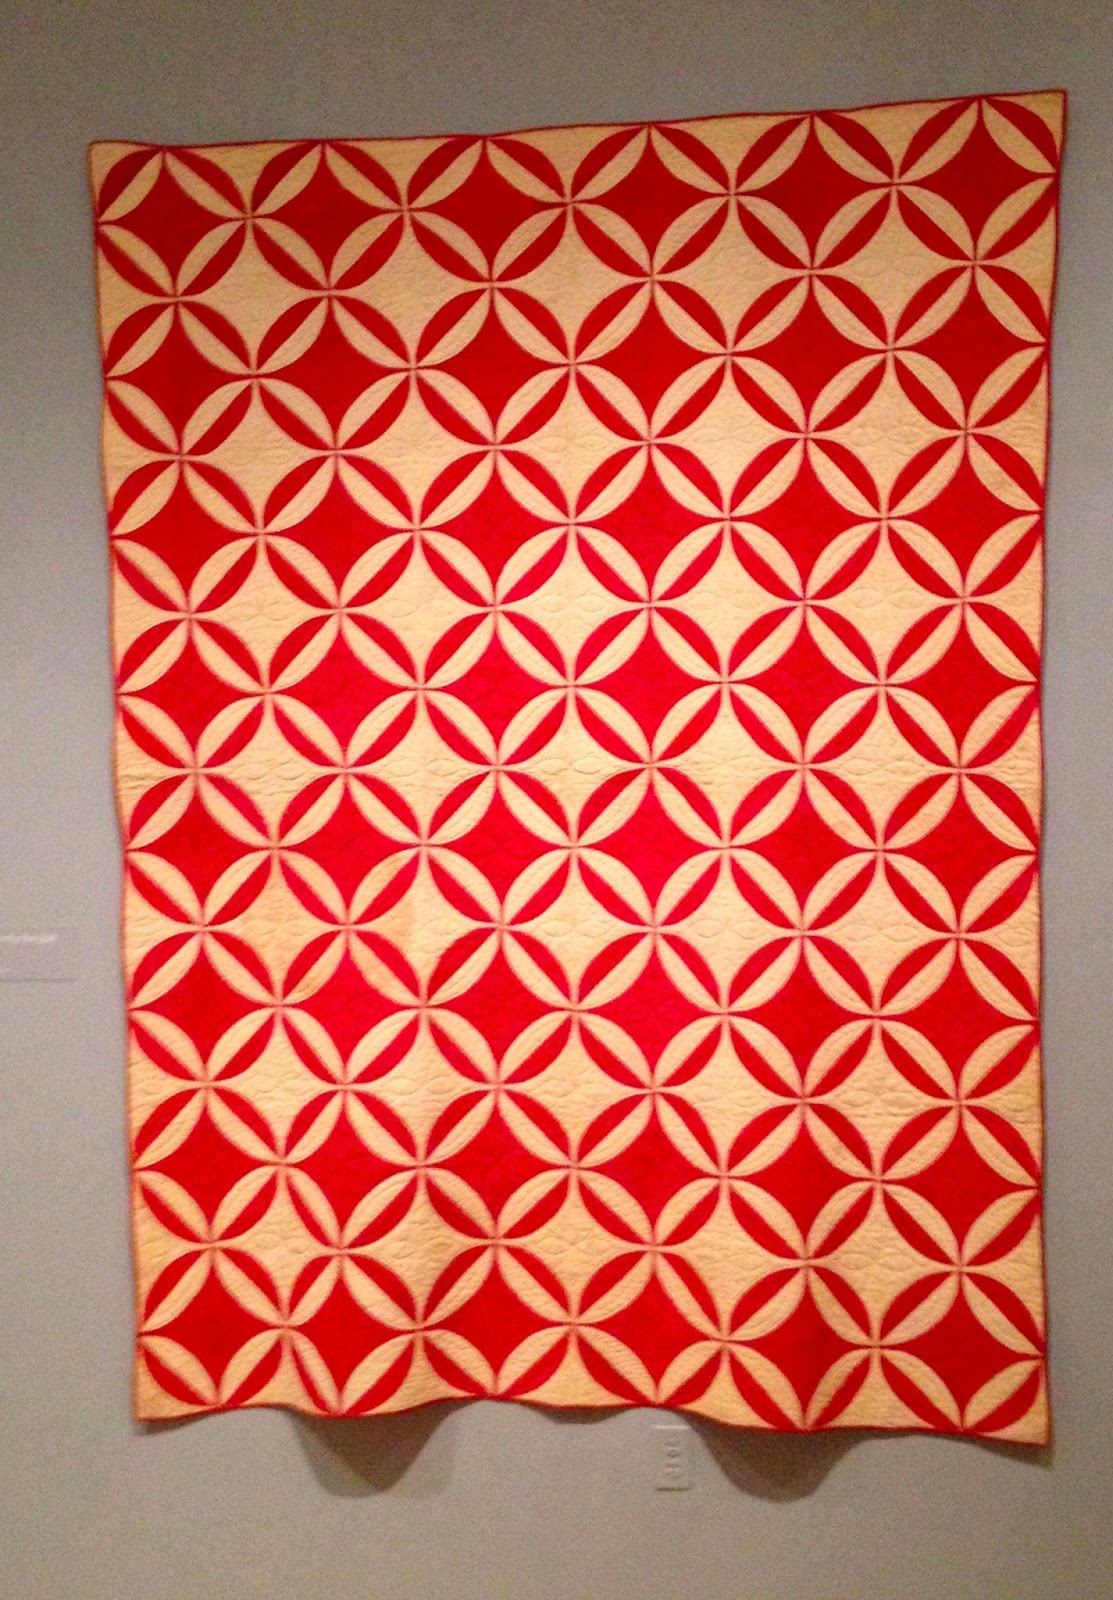 c. 1850 cotton quilt, mounted vertically